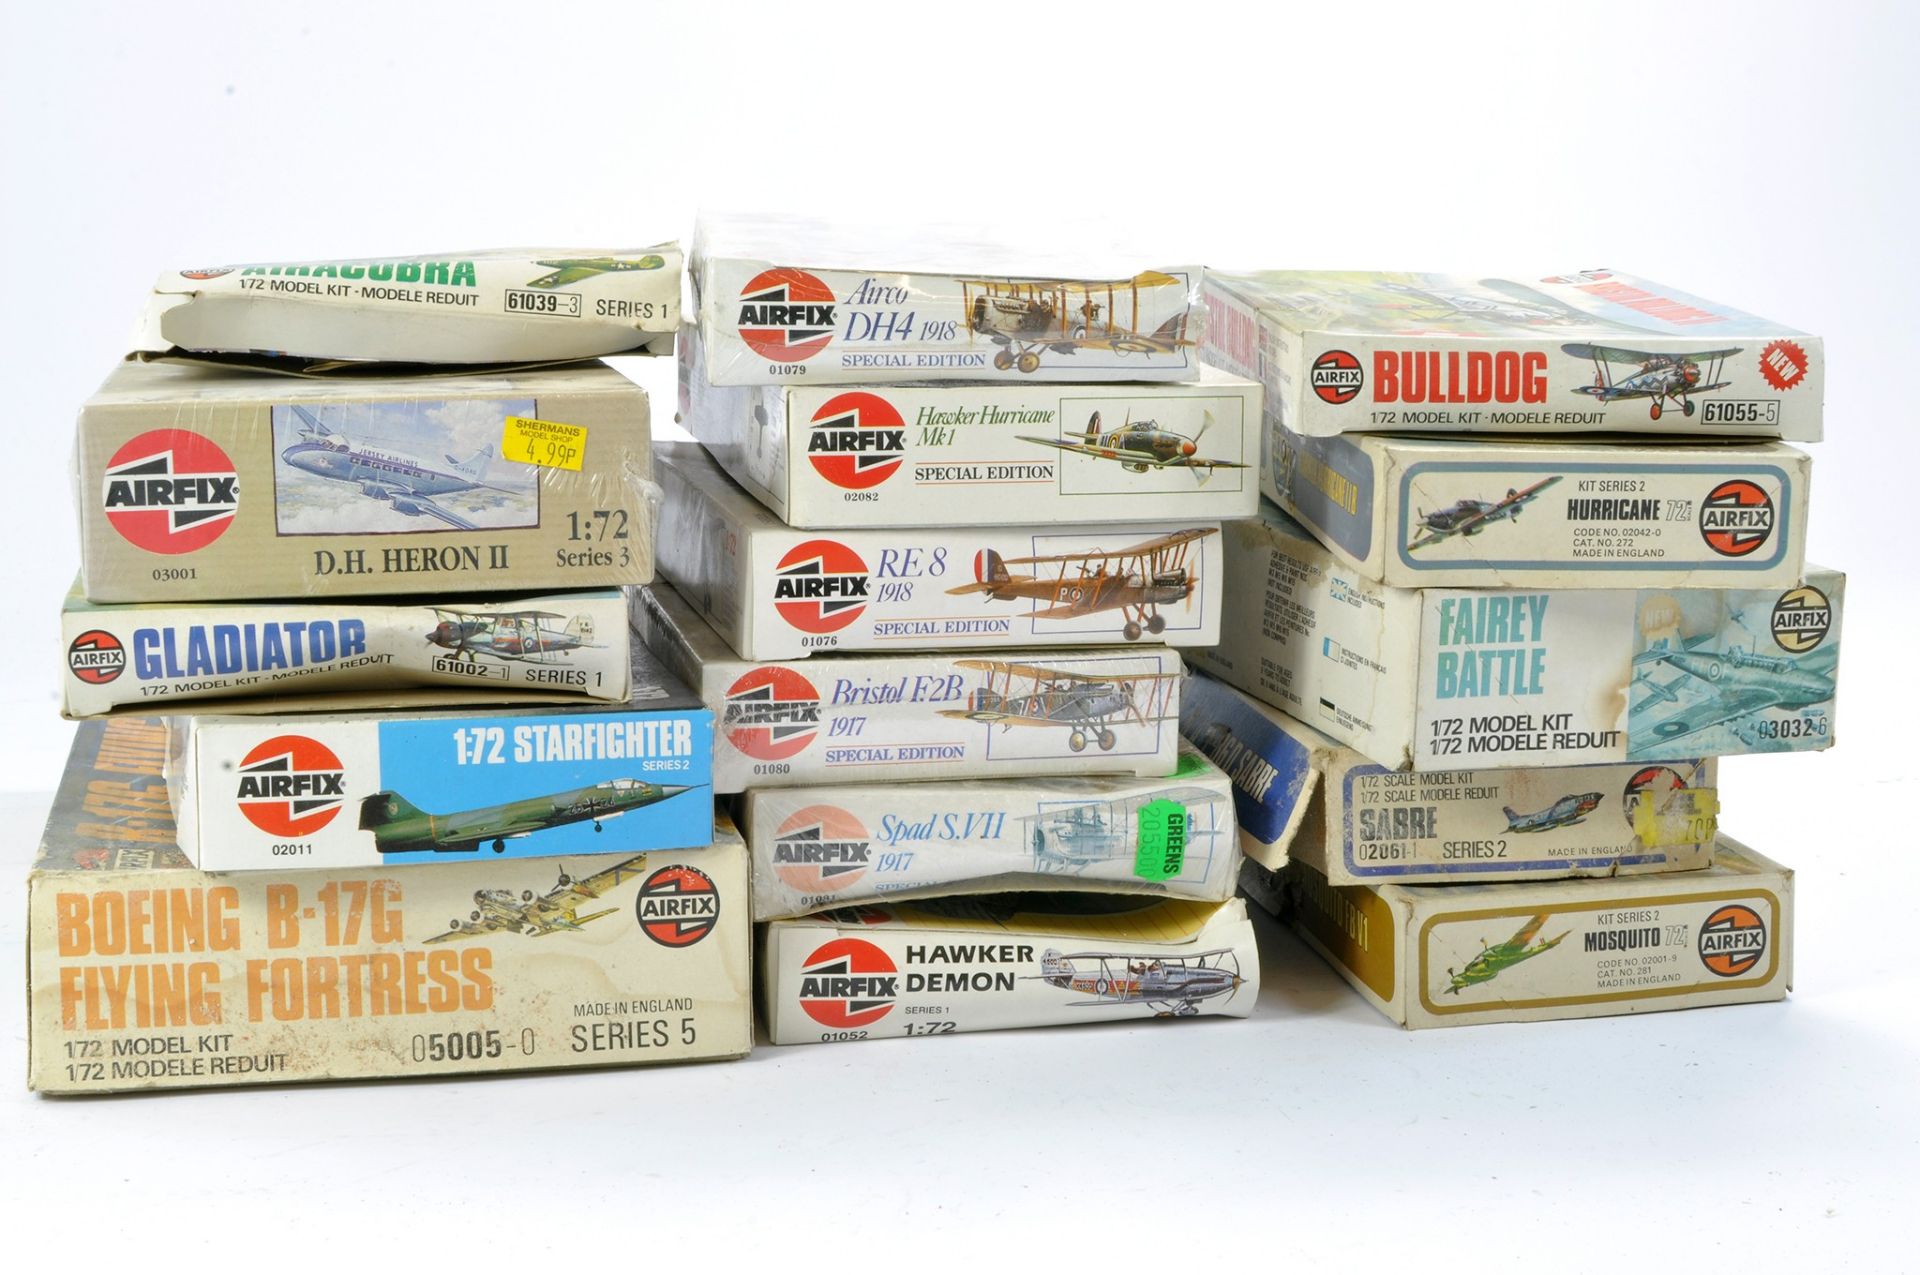 Sixteen Plastic Model Kits, mostly older issue Airfix Aircraft. All look to be complete and